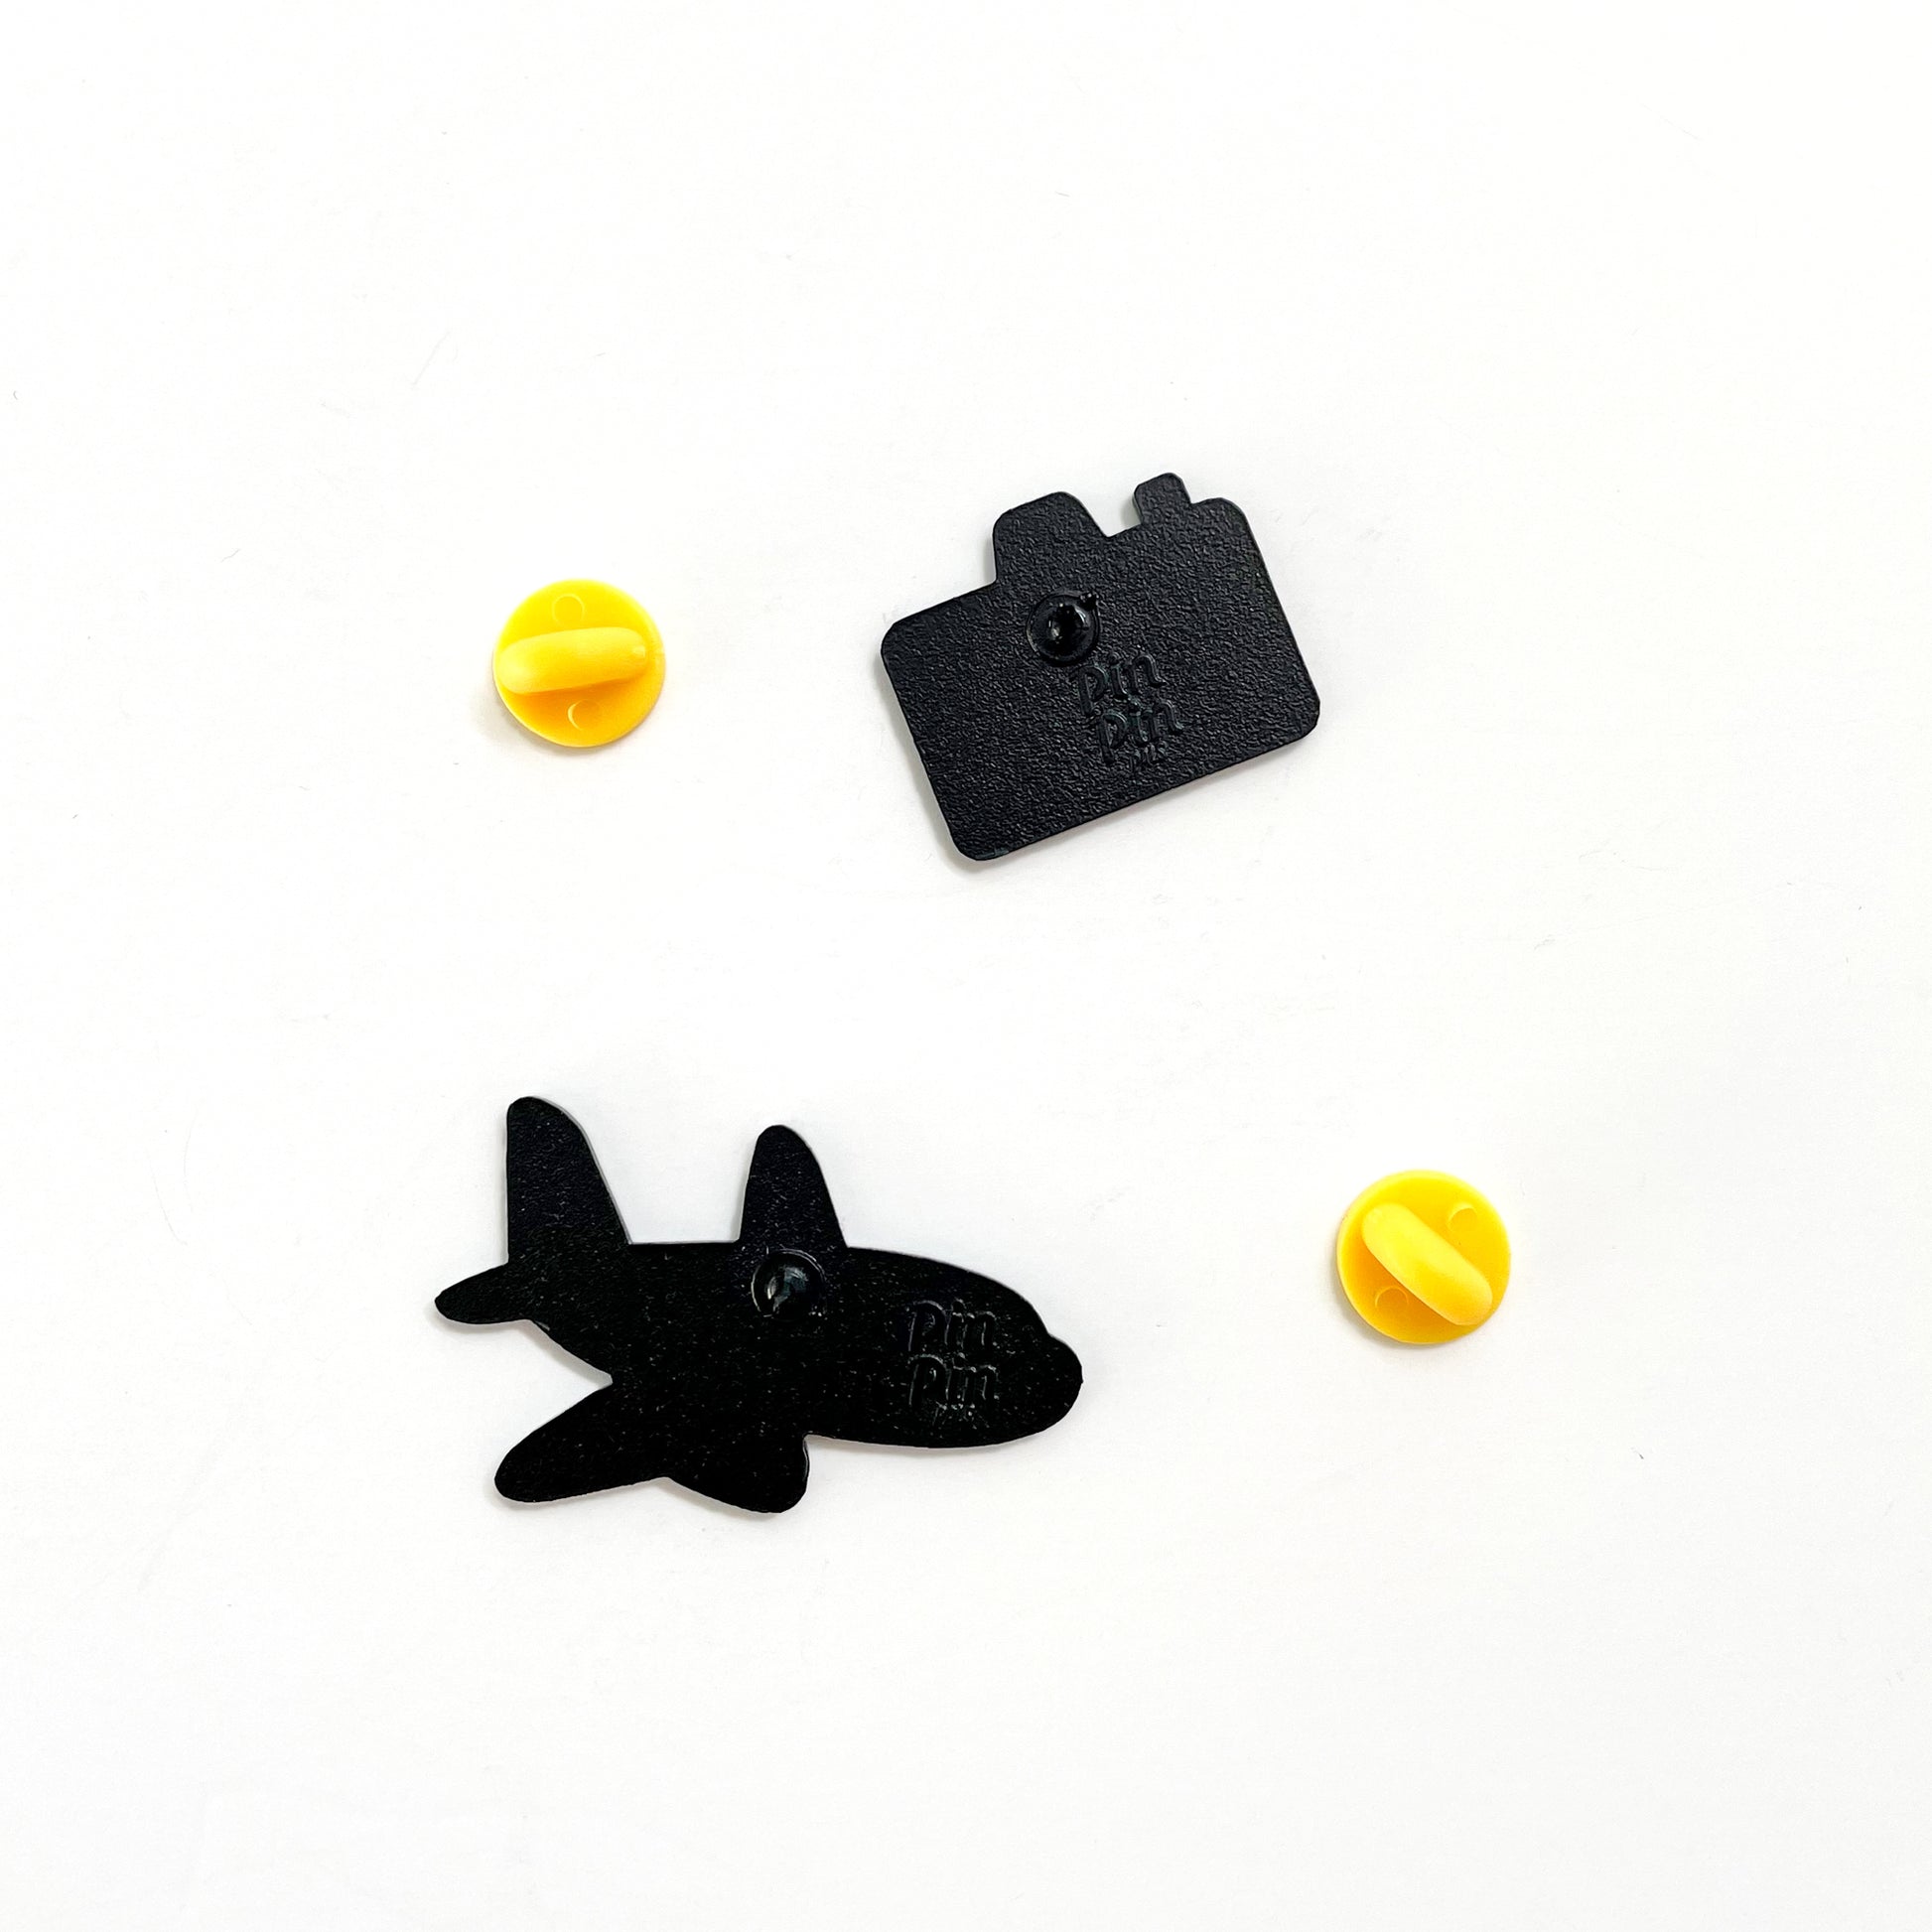 Back of plane and camera enamel pins with yellow rubber backings